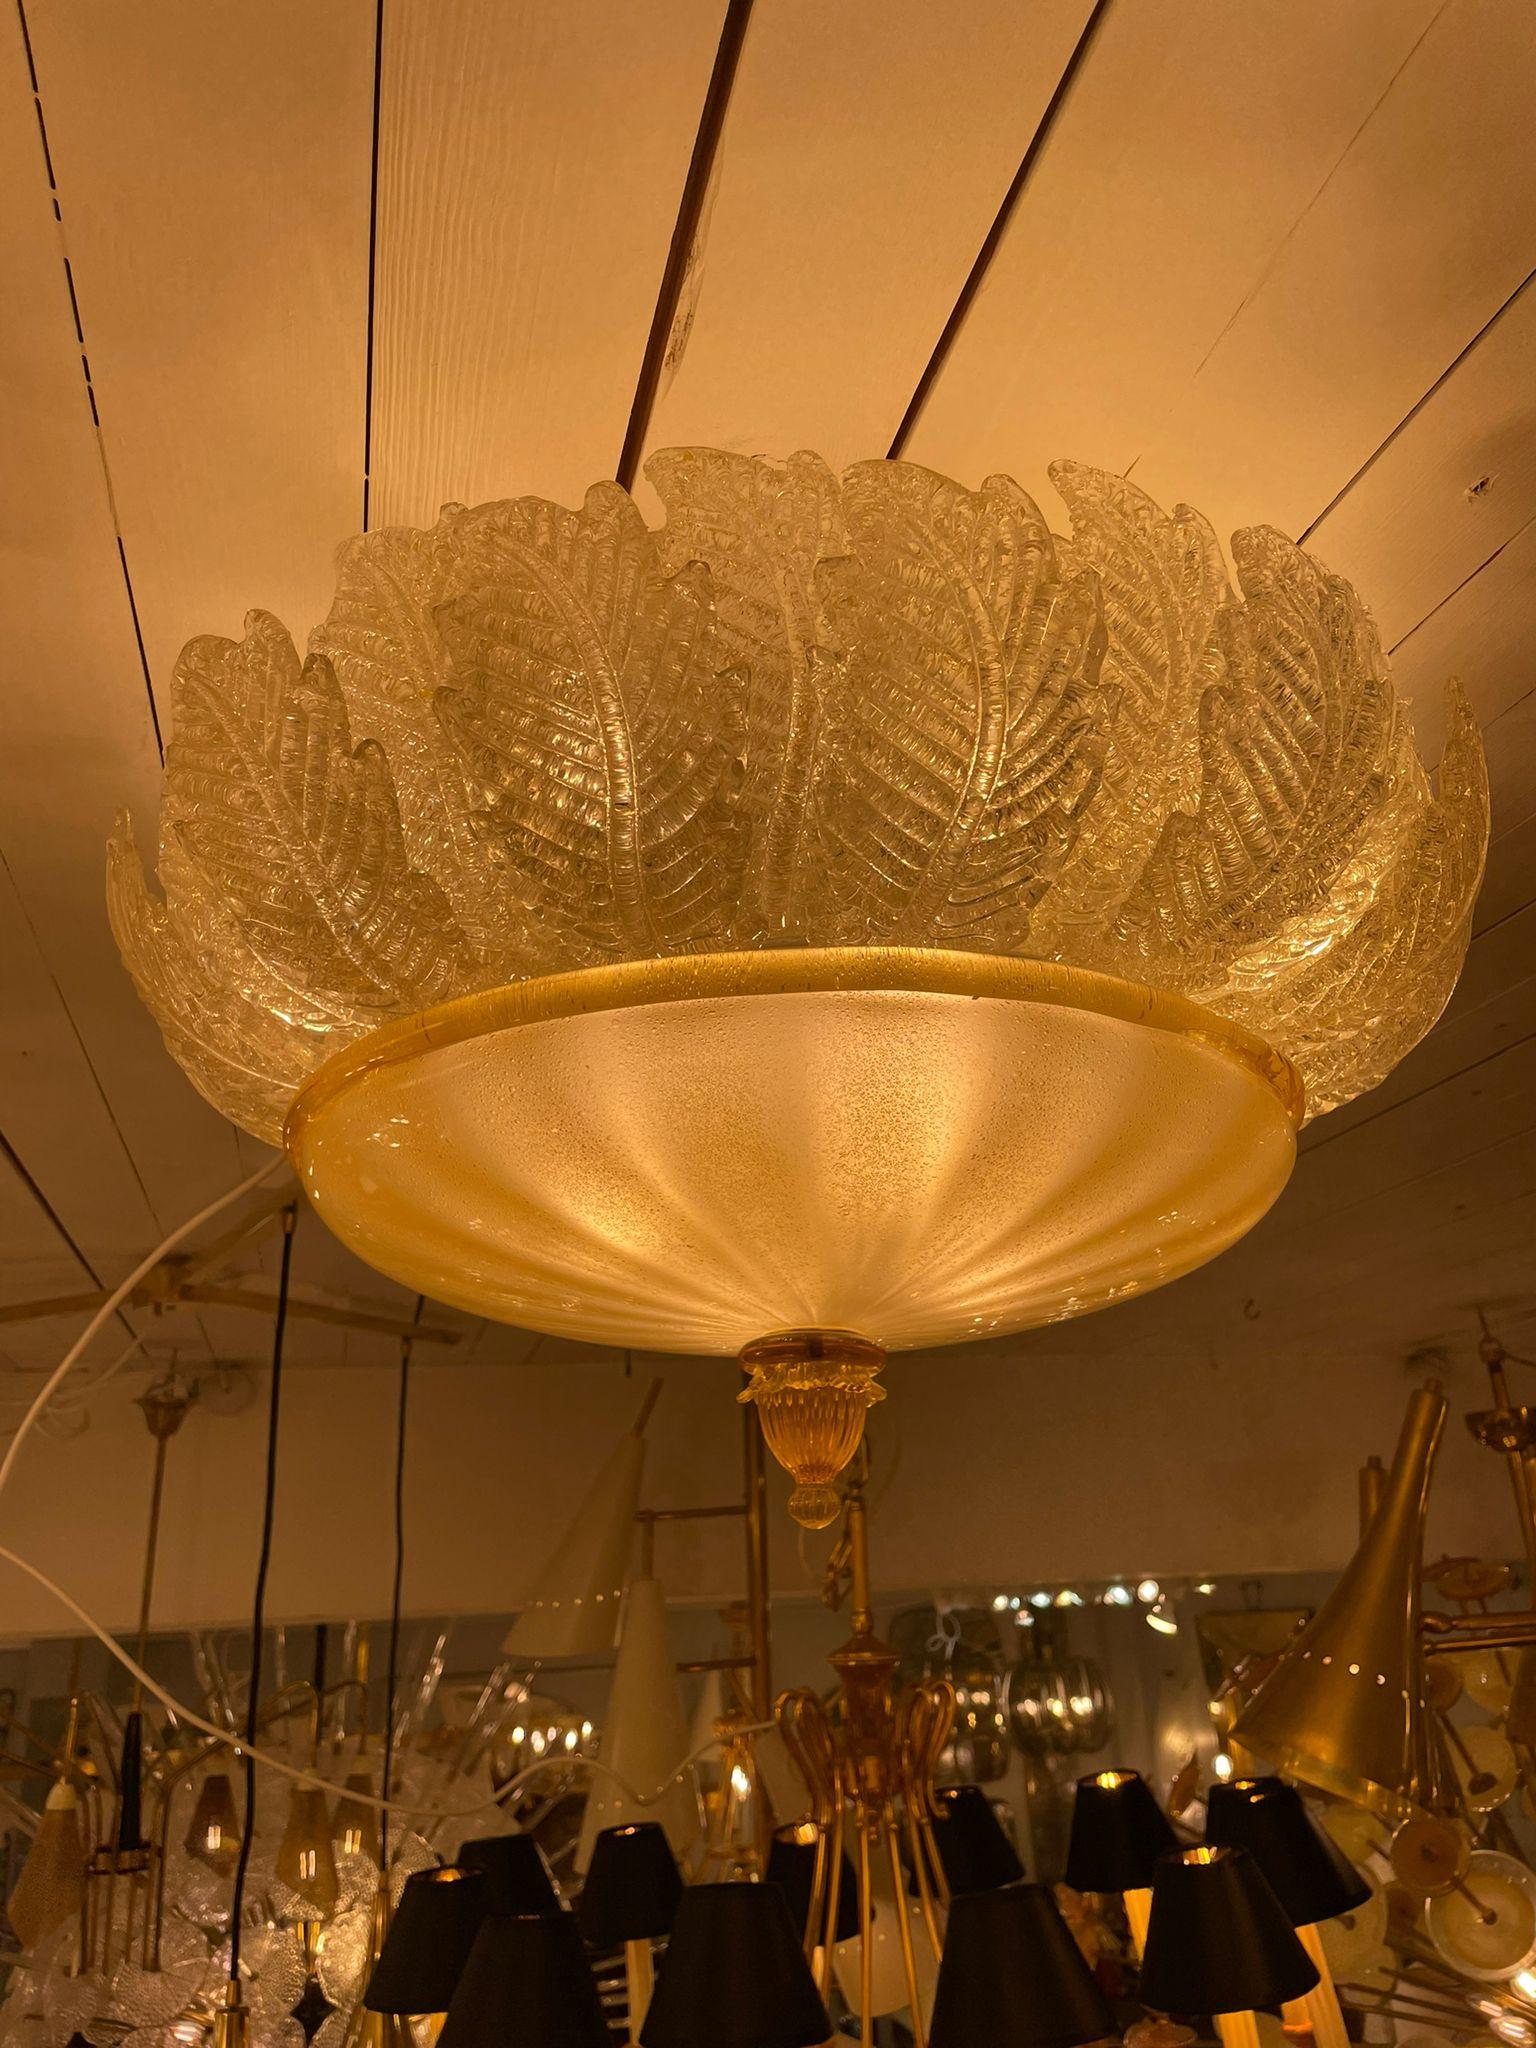 Fantastic and fabulous Barovier and Toso Murano Italy art glass ceiling light. The rare lamp is made of 28 mouth-blown hand-formed leaf-form golden powder glass panels plus a huge glass as a bottom. This beauty has the look of a precious big flower.